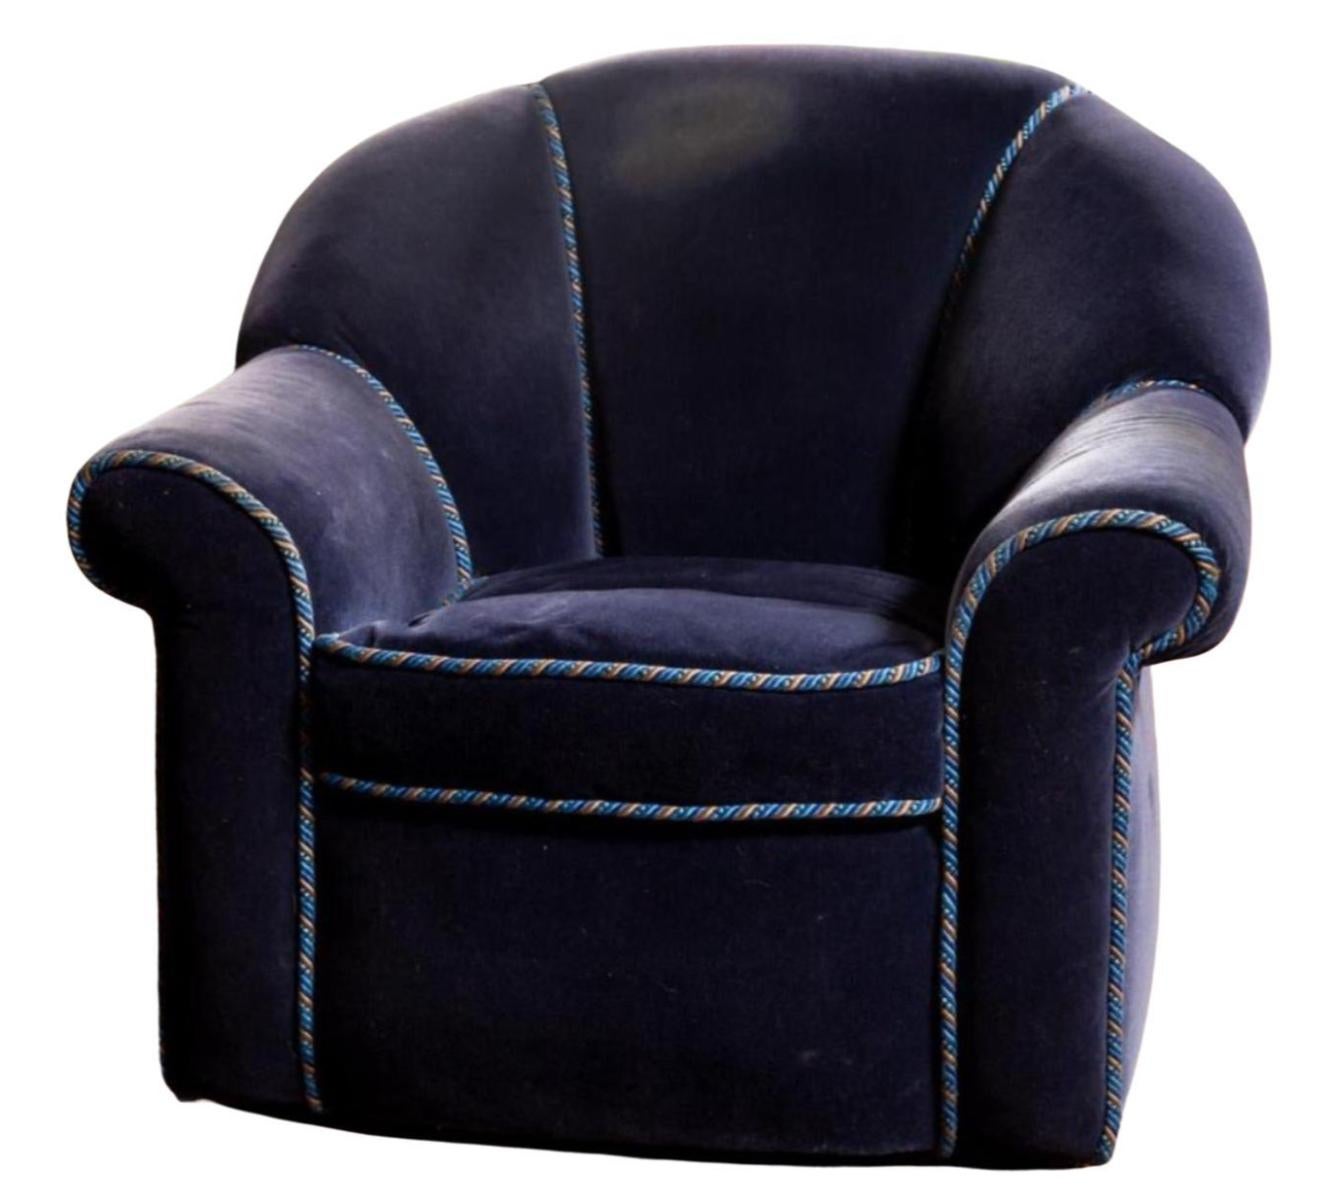 20th Century Art Deco Style Fully Upholstered Sapphire Blue Mohair Club Chair